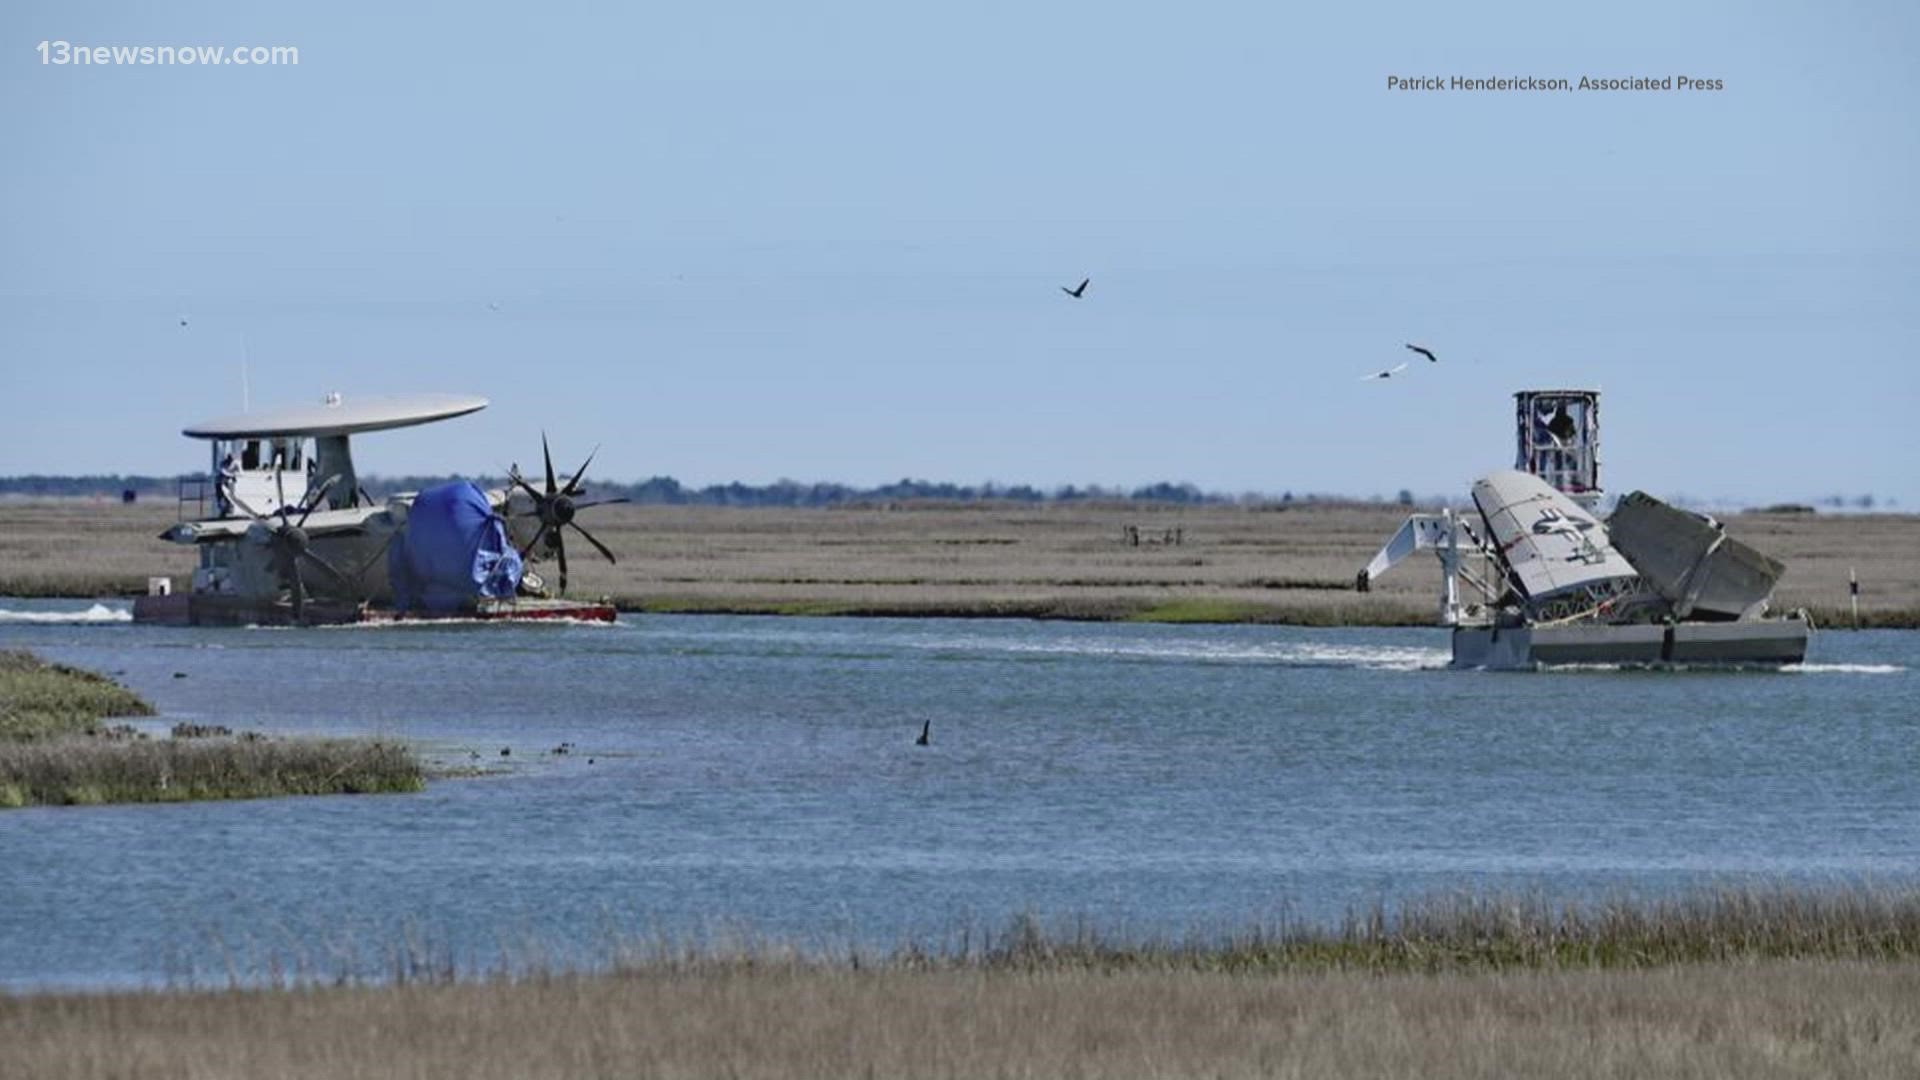 This is an effort to review safety strategies in the aftermath of several aircraft crashes within the last few months, including a deadly one on the eastern shore.